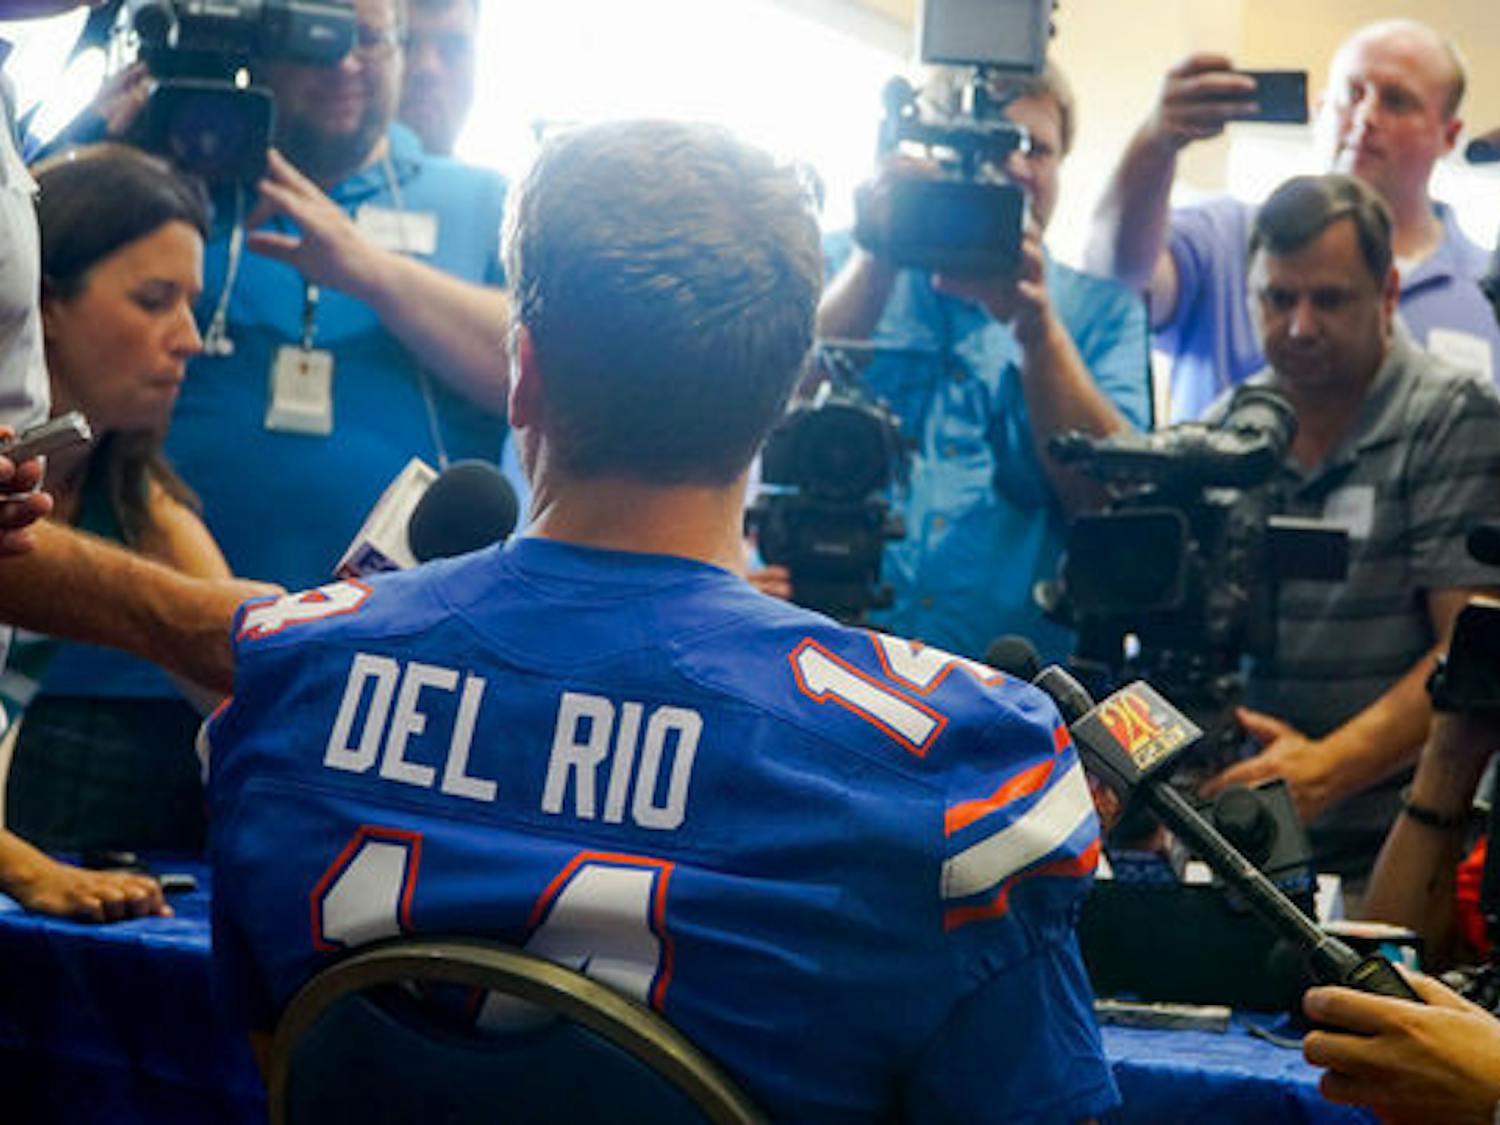 After a 5-1 record as a starter, Del Rio is fighting to keep his job against redshirt freshman Feleipe Franks and transfer Malik Zaire.